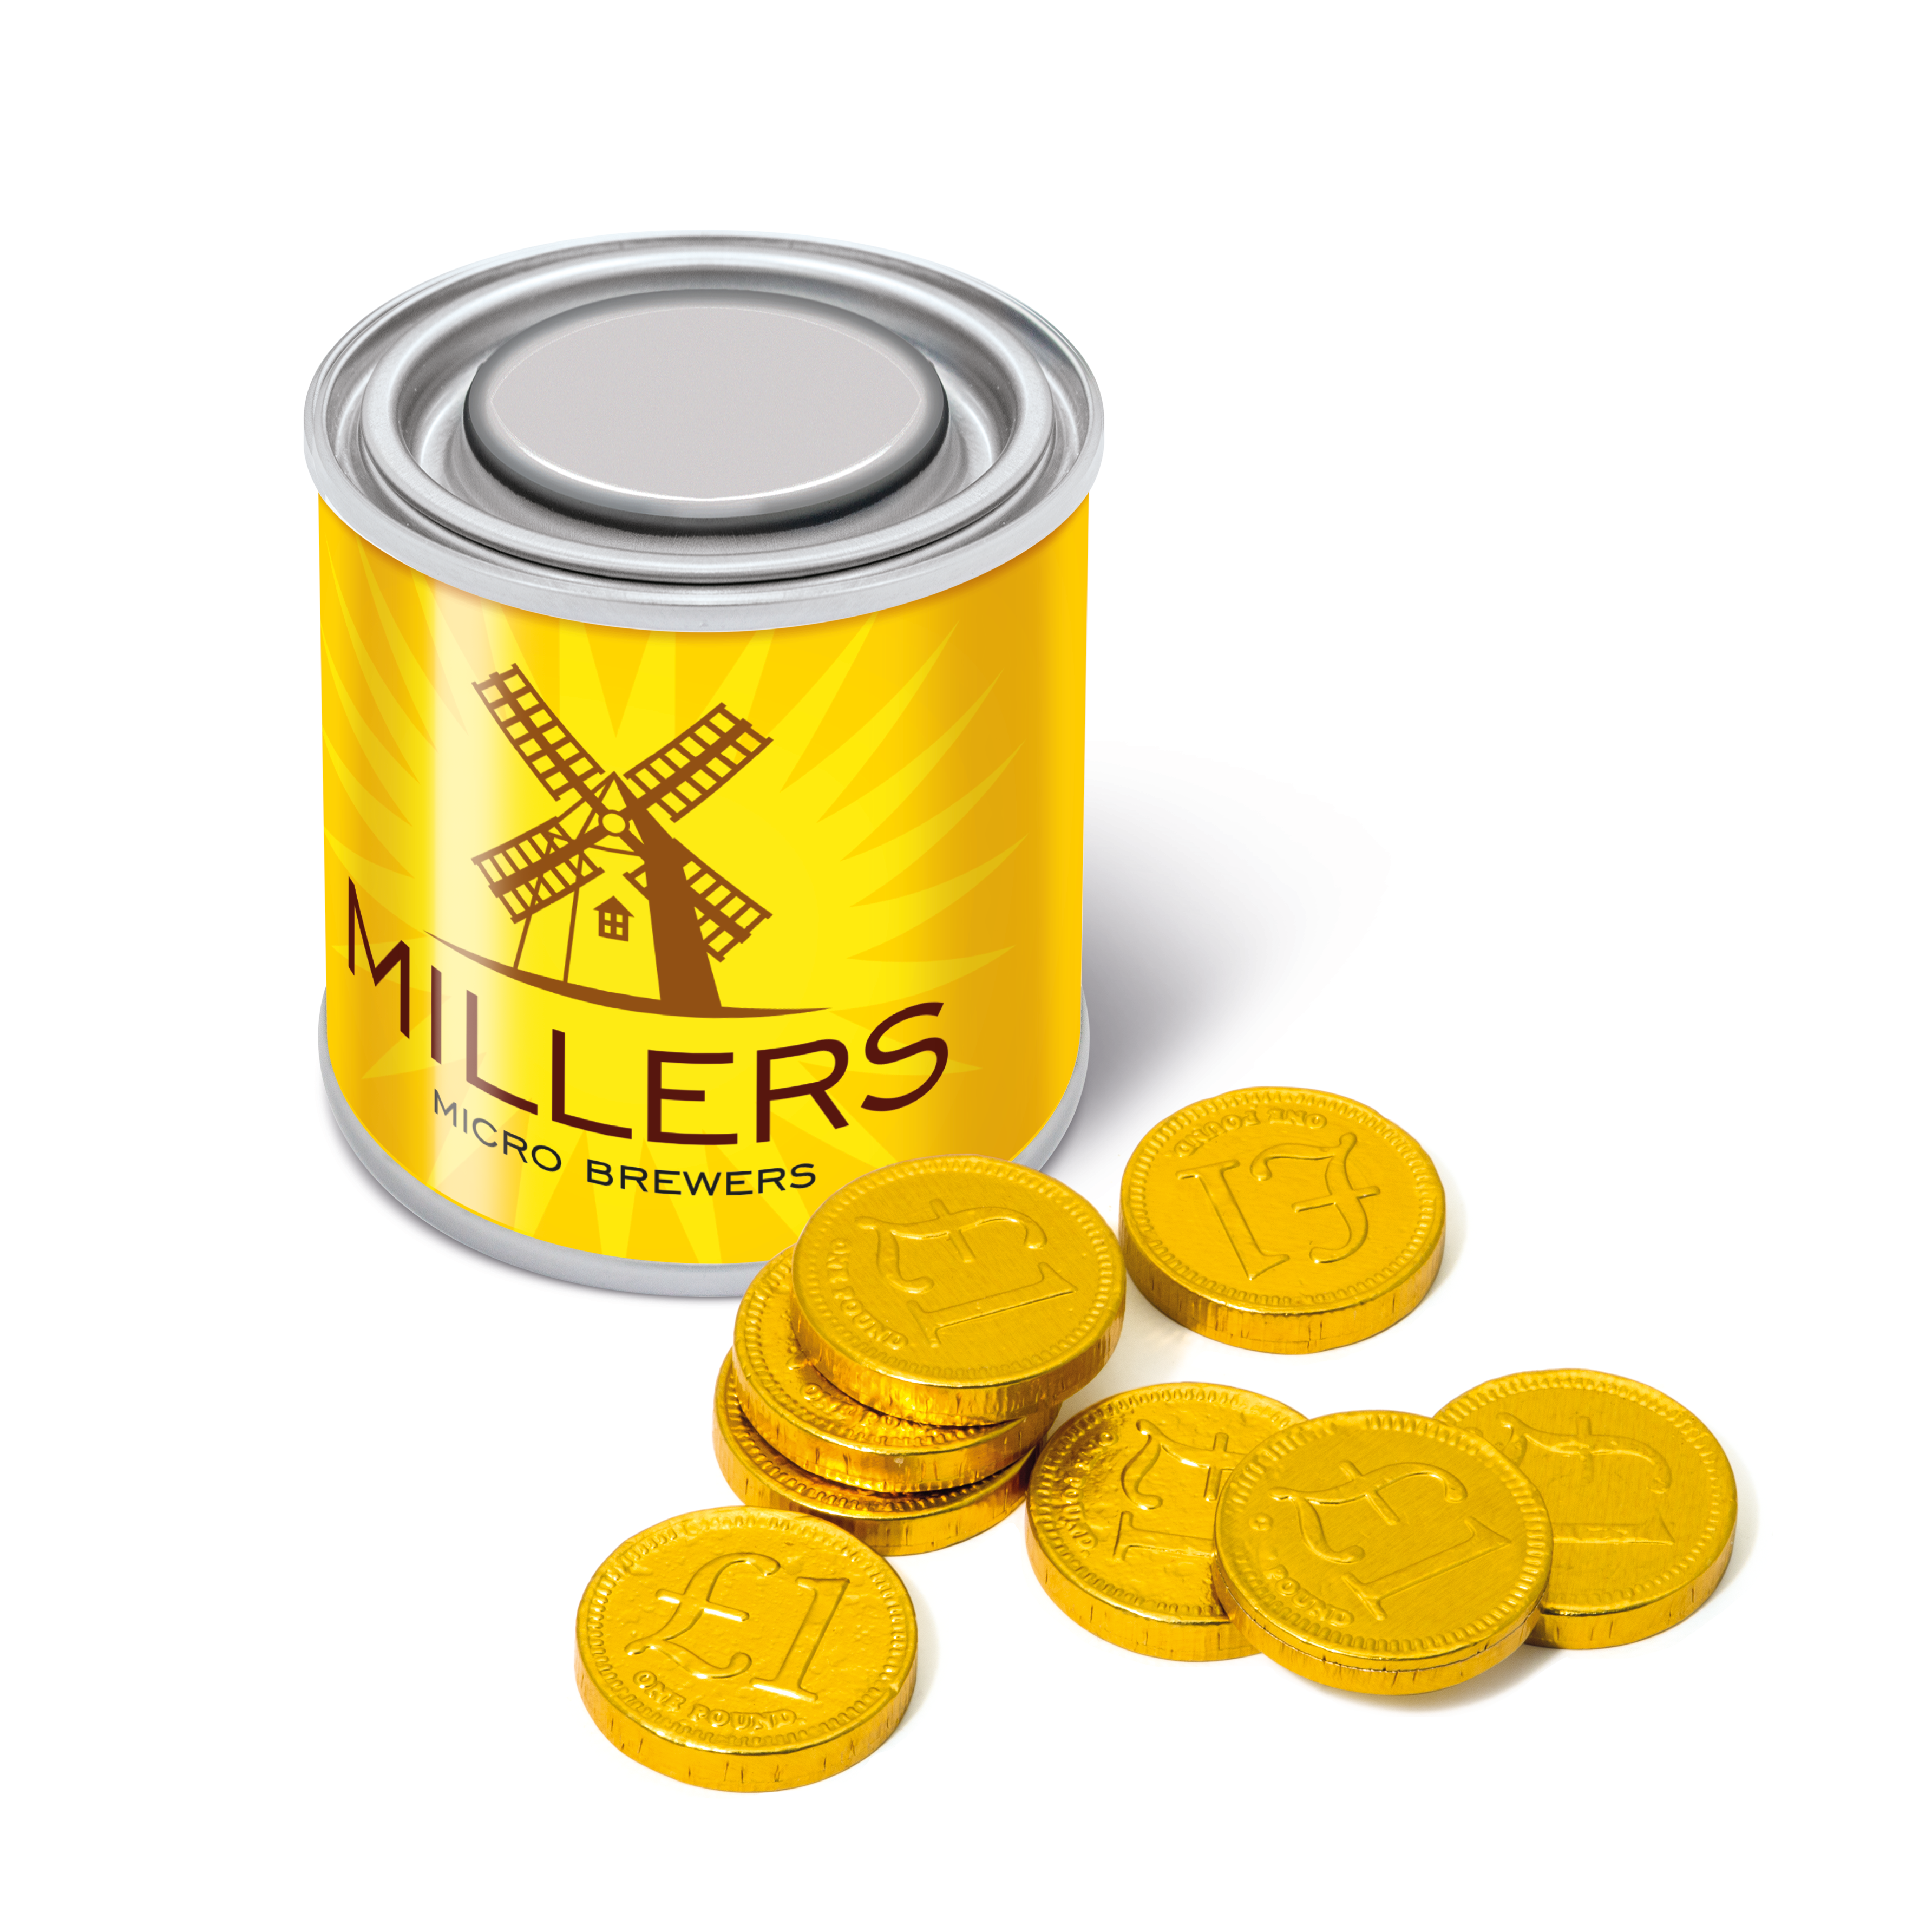 Small Paint Tin - Chocolate Coins